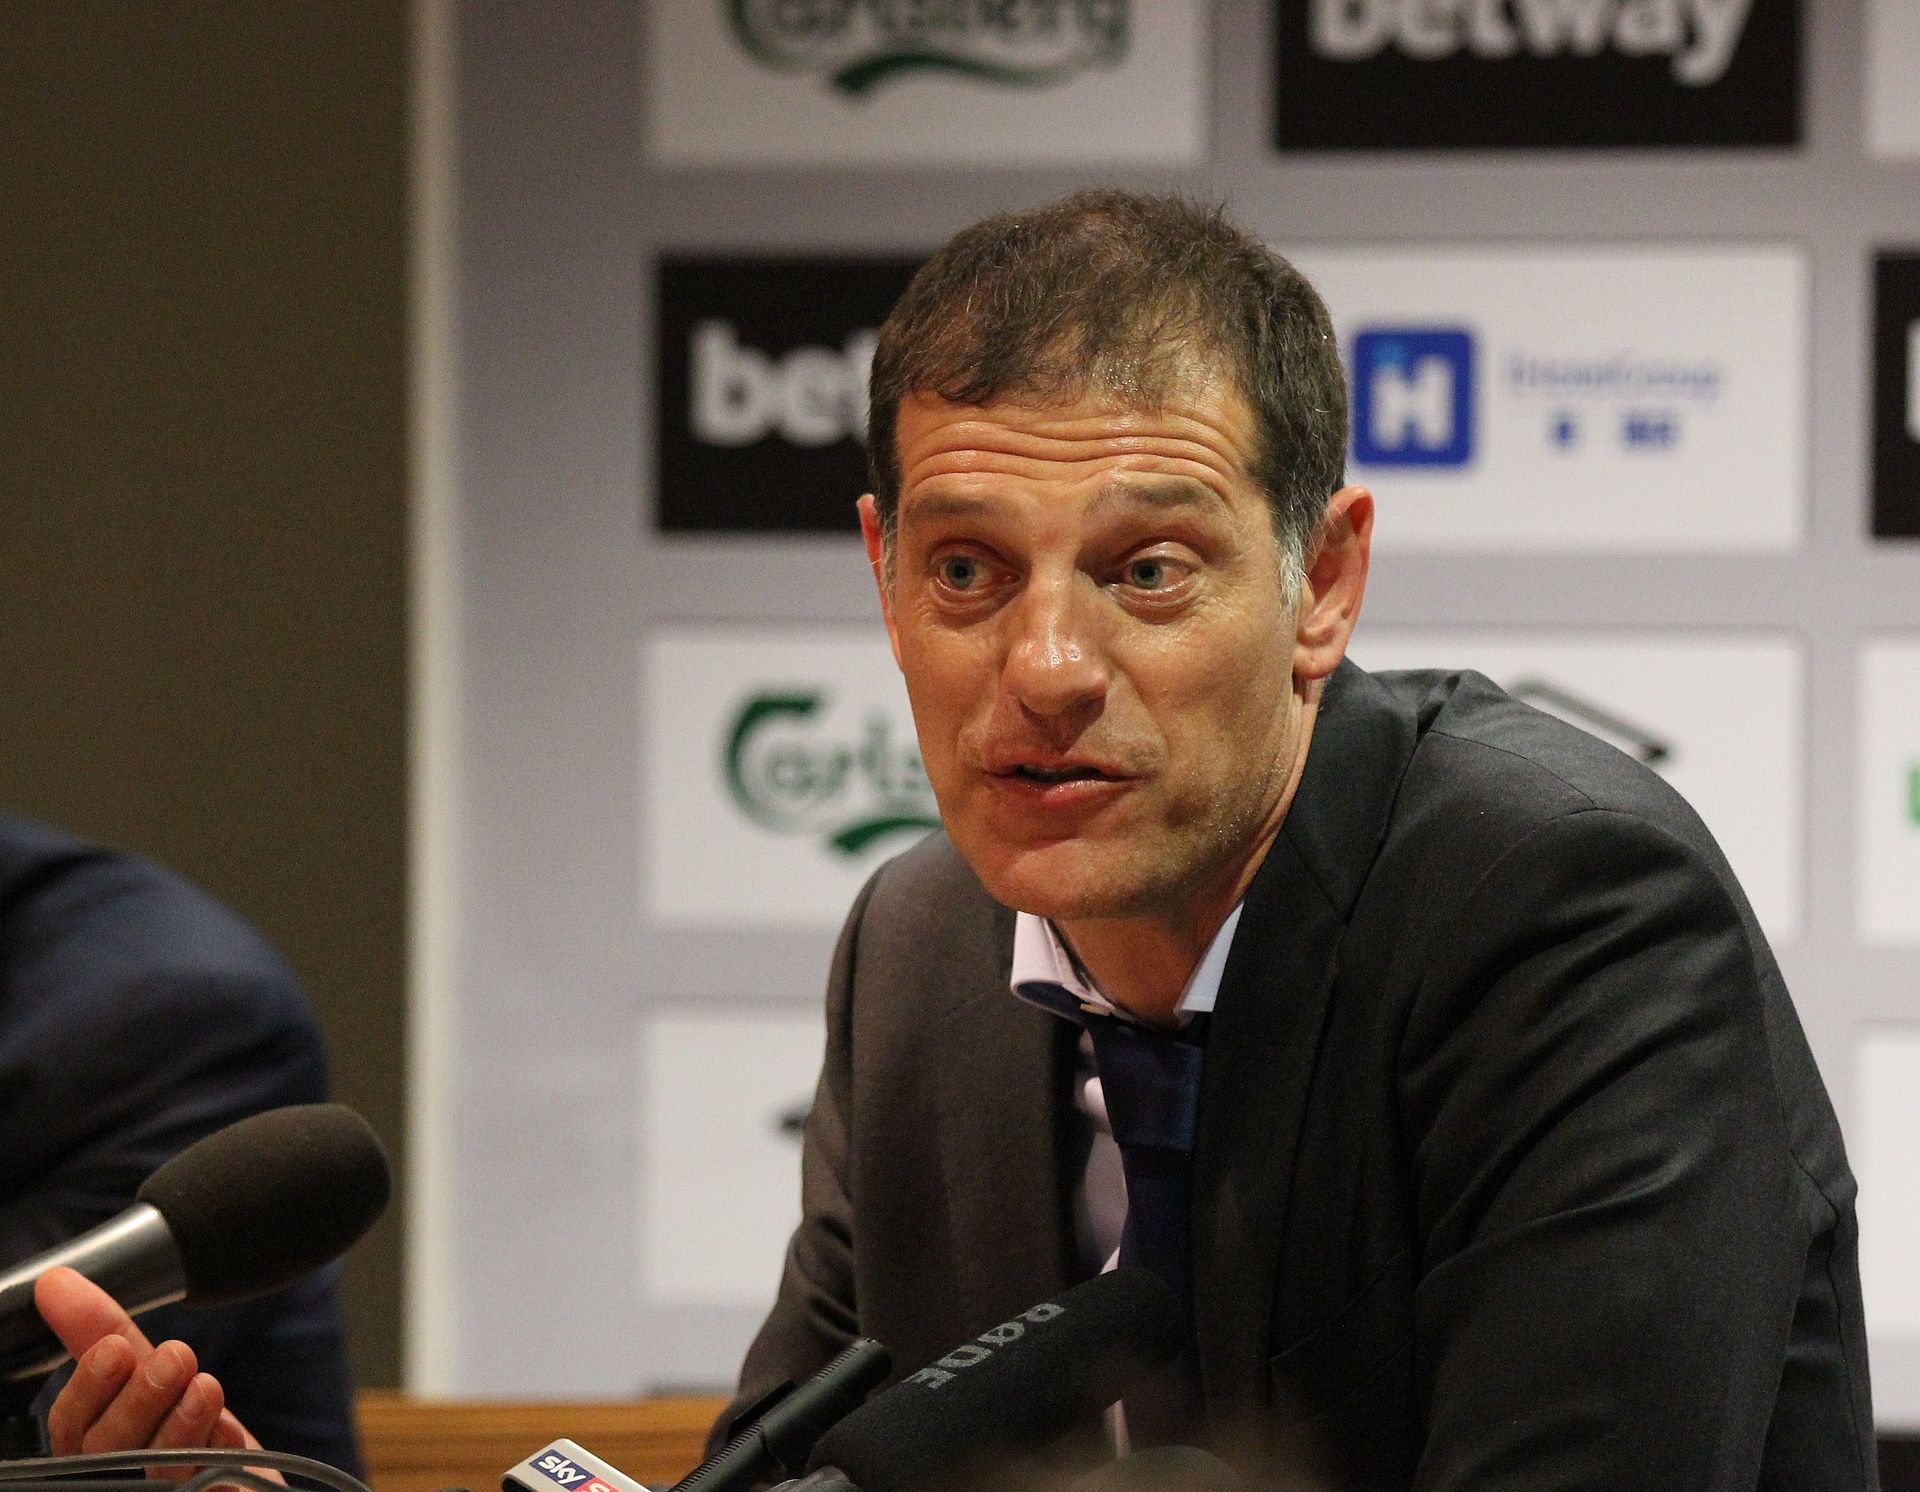 Slaven Bilic becomes the first Premier League manager to be fired West Brom